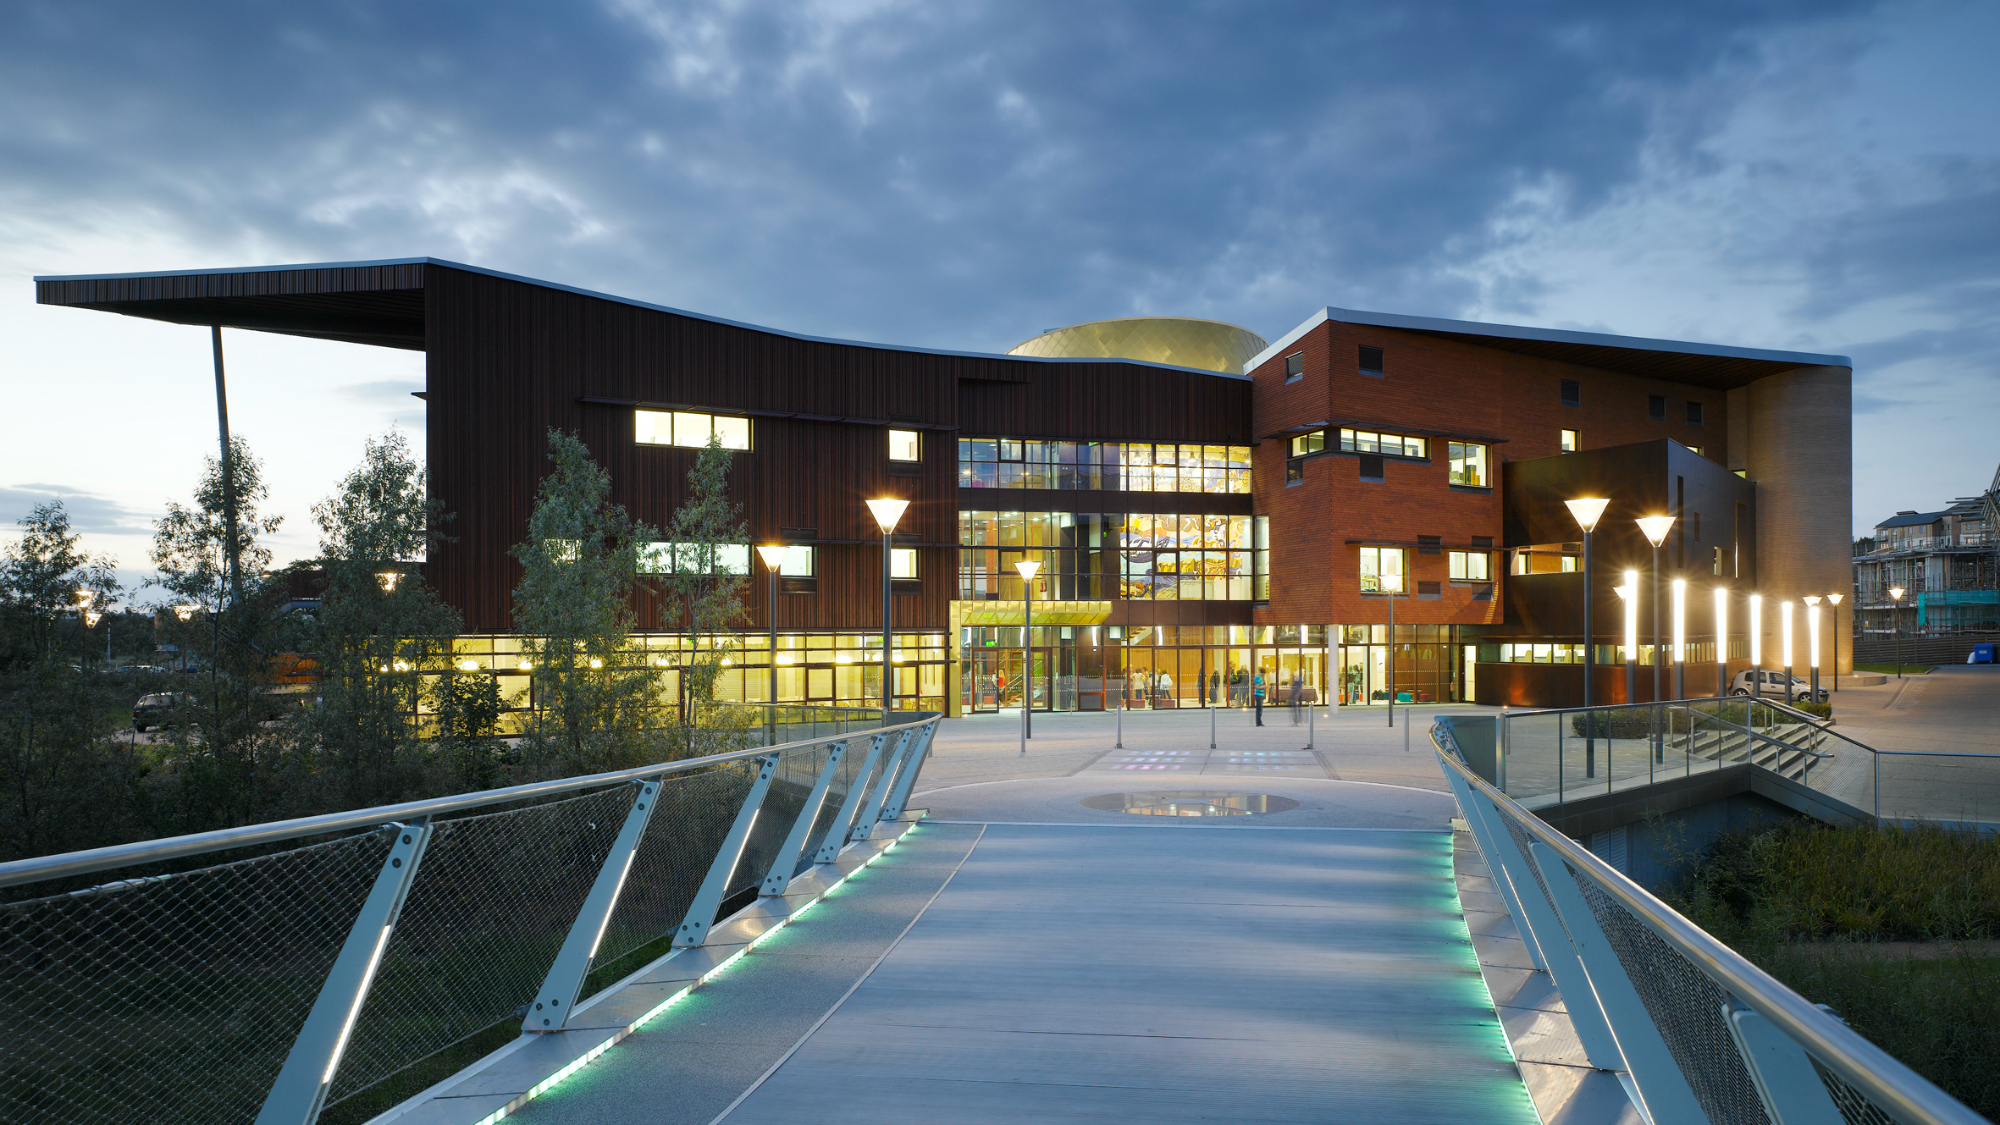 Exterior view at night-time of the Irish World Academy of Music and Dance showing a bridge in the foreground.